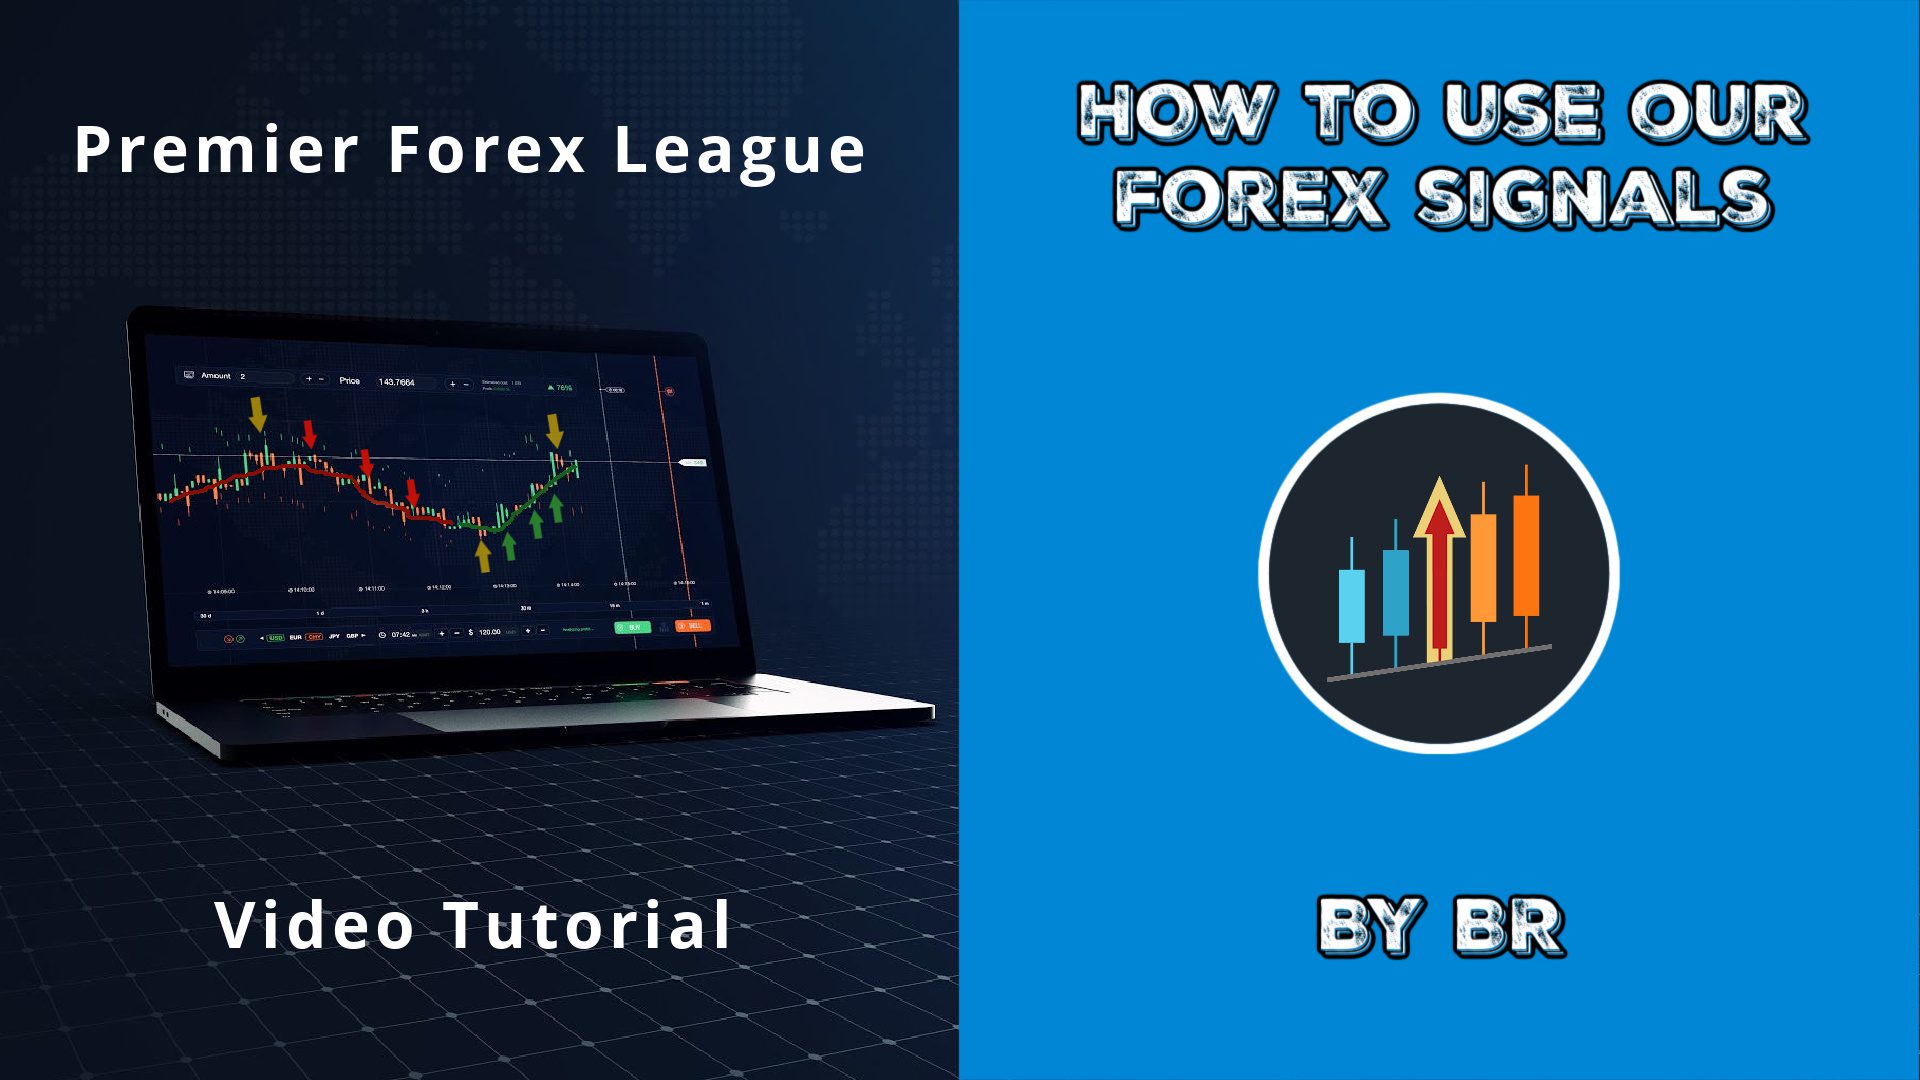 How to Use Our Forex Signals by BR